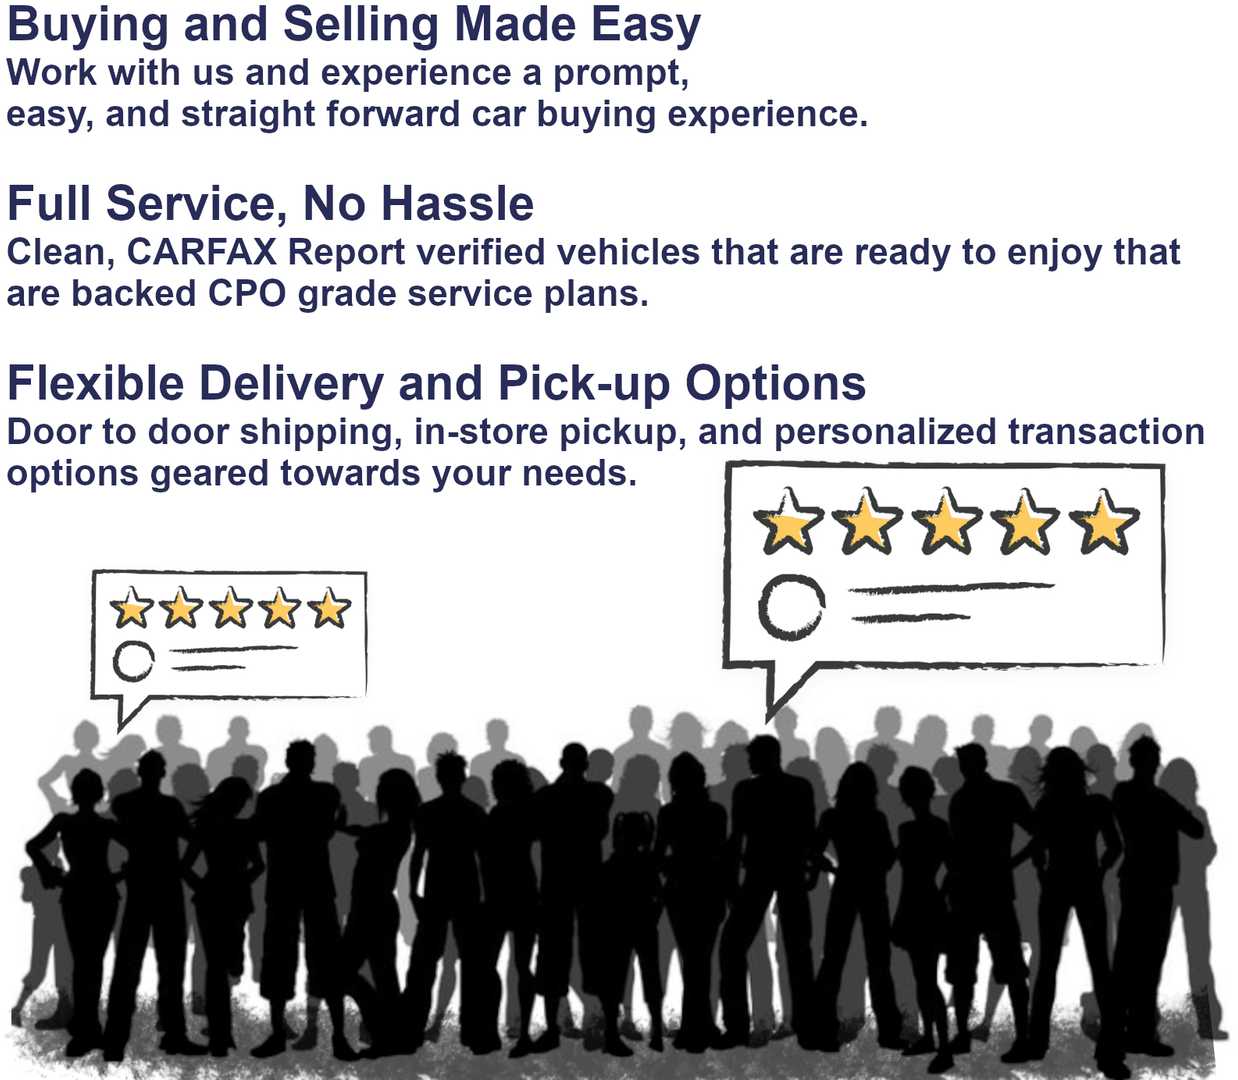 Buying and selling used cars with Driven is easy, straighforward, and cost effective!